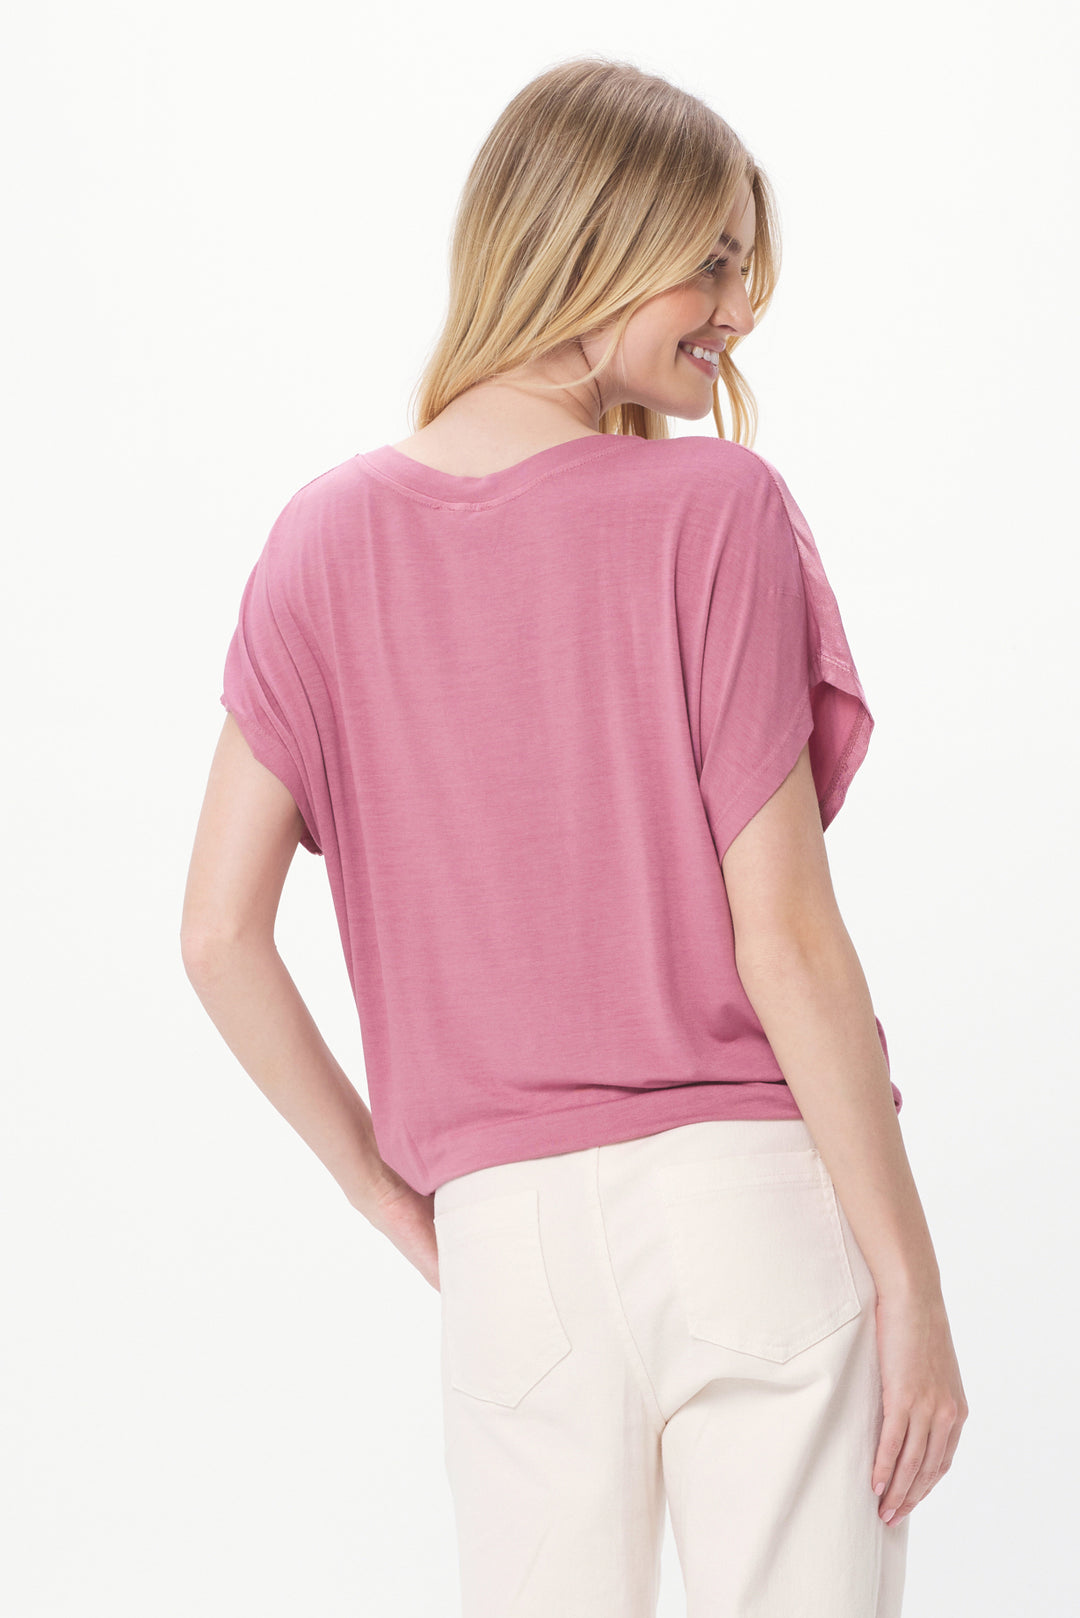 HALE SATIN FRONT DRAWSTRING TEE-ROSE - Kingfisher Road - Online Boutique